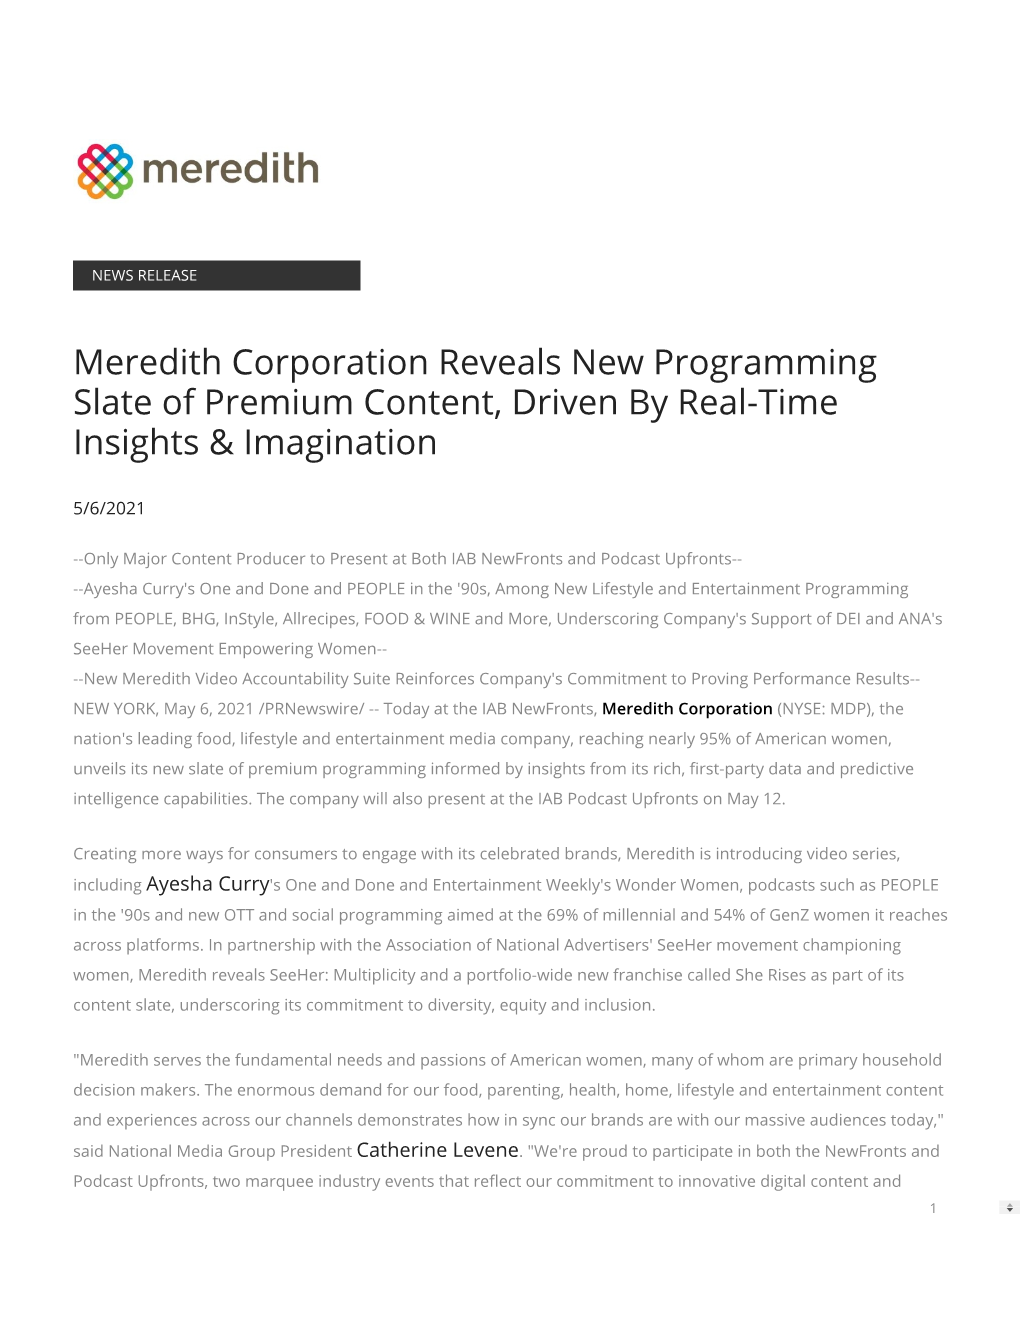 Meredith Corporation Reveals New Programming Slate of Premium Content, Driven by Real-Time Insights & Imagination